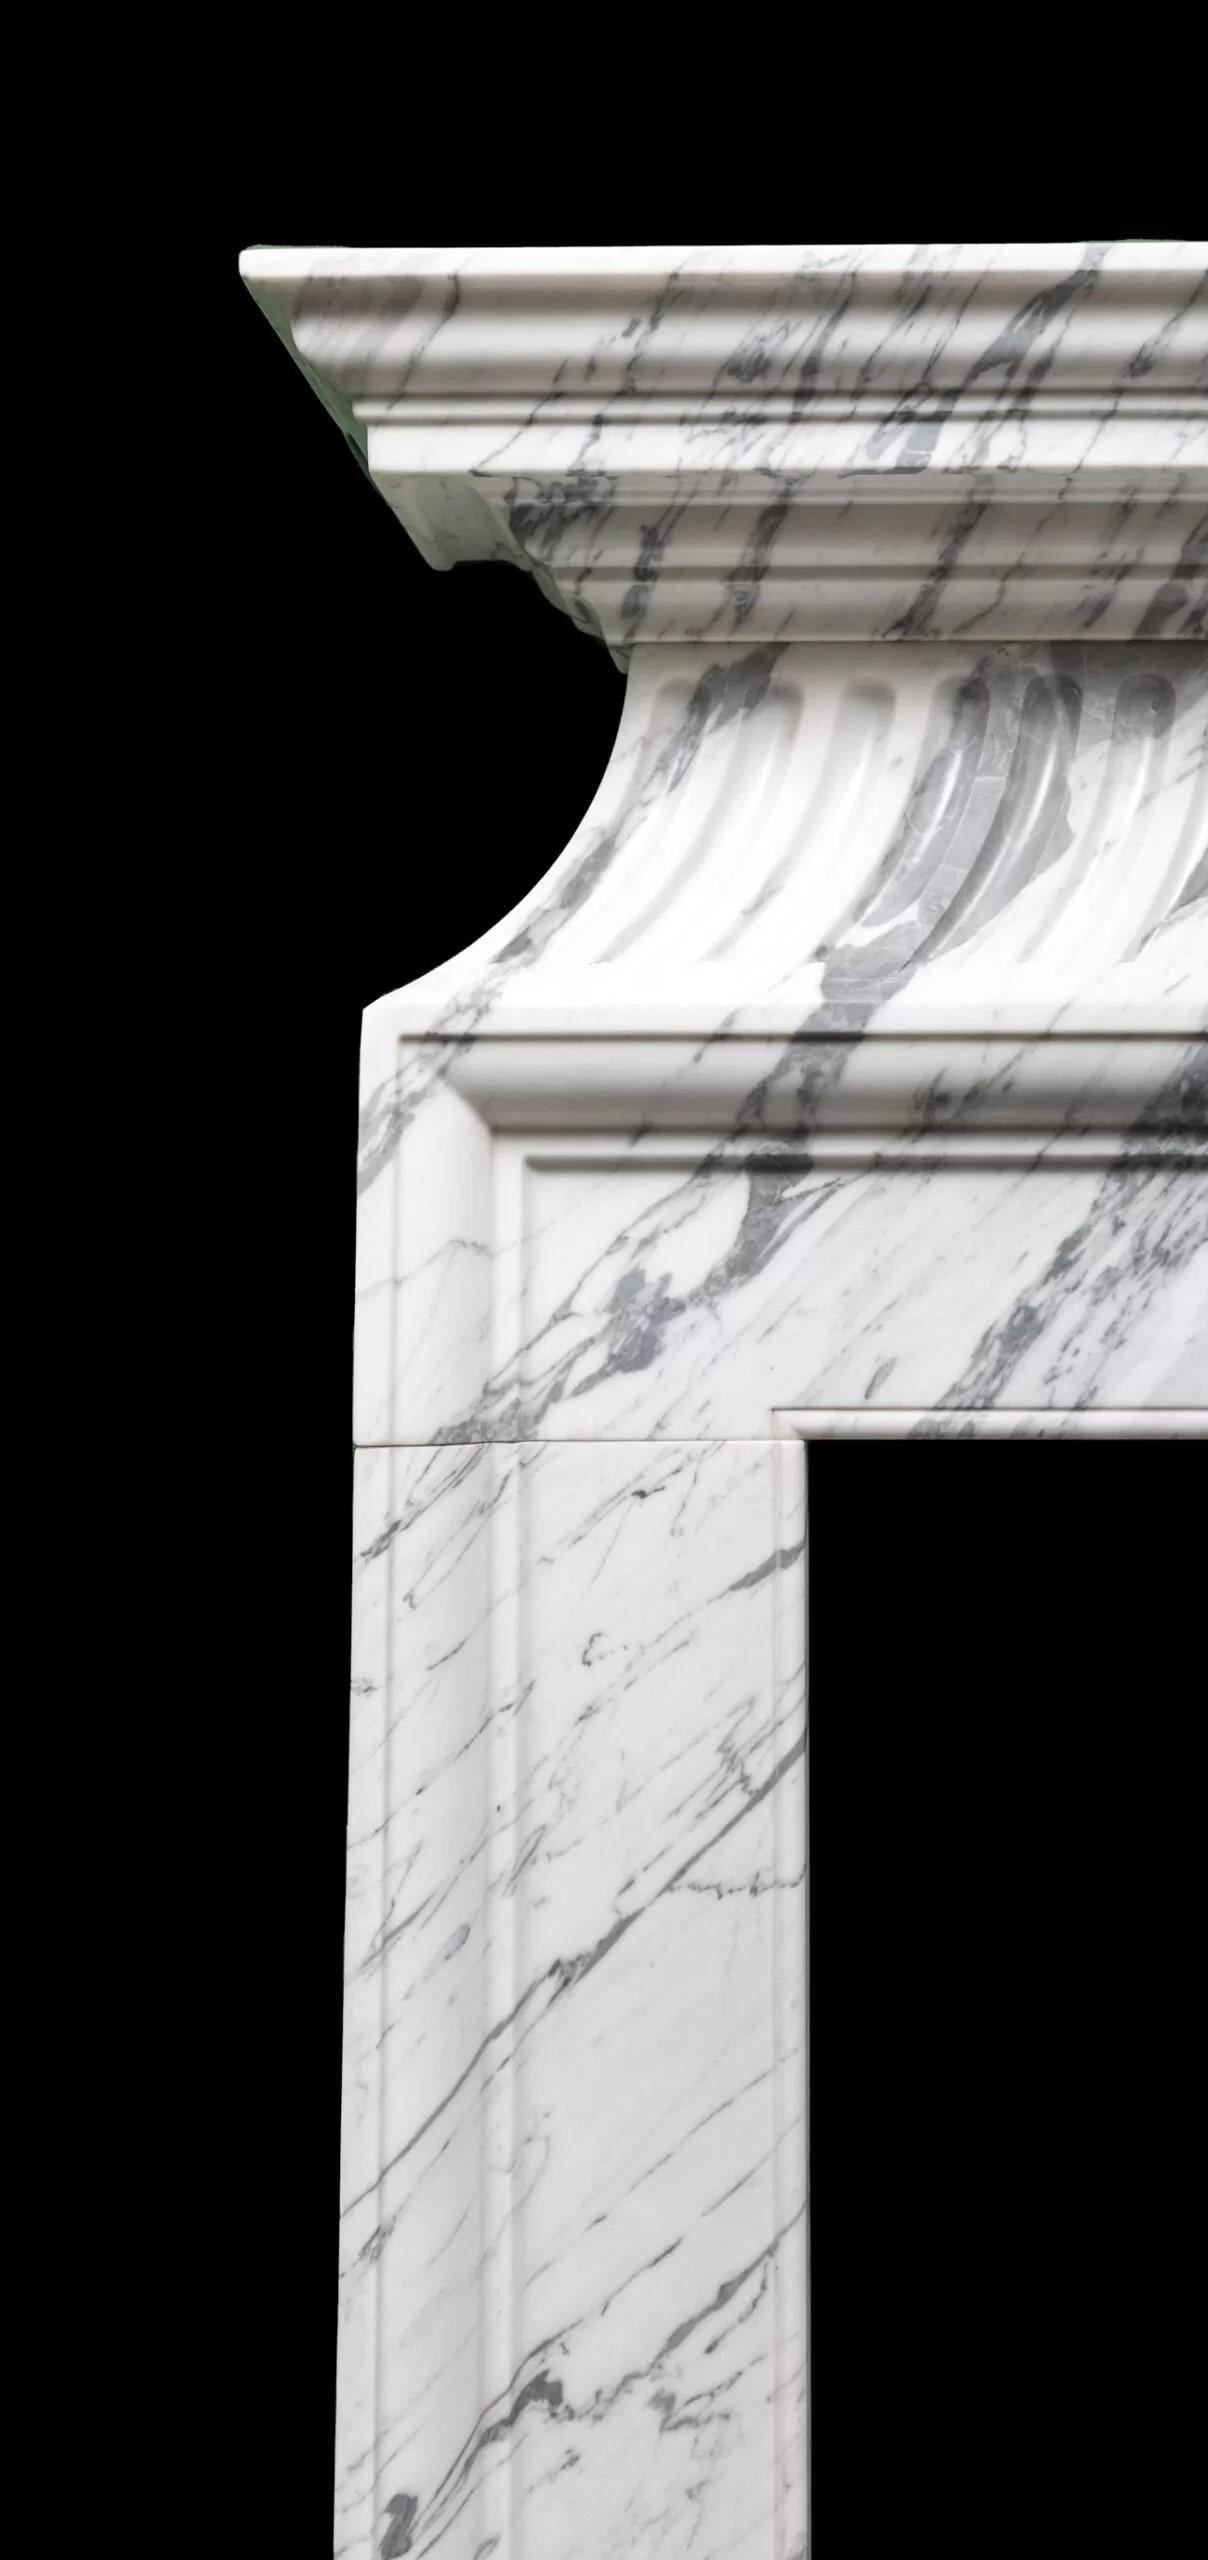 The Chelsea is a tall and elegant neoclassical style fire surround in Italian Carrara marble made by Ryan and Smith.
Modelled straight off an 18th century original chimneypiece, this neoclassical style fire surround in grey veined Carrara marble